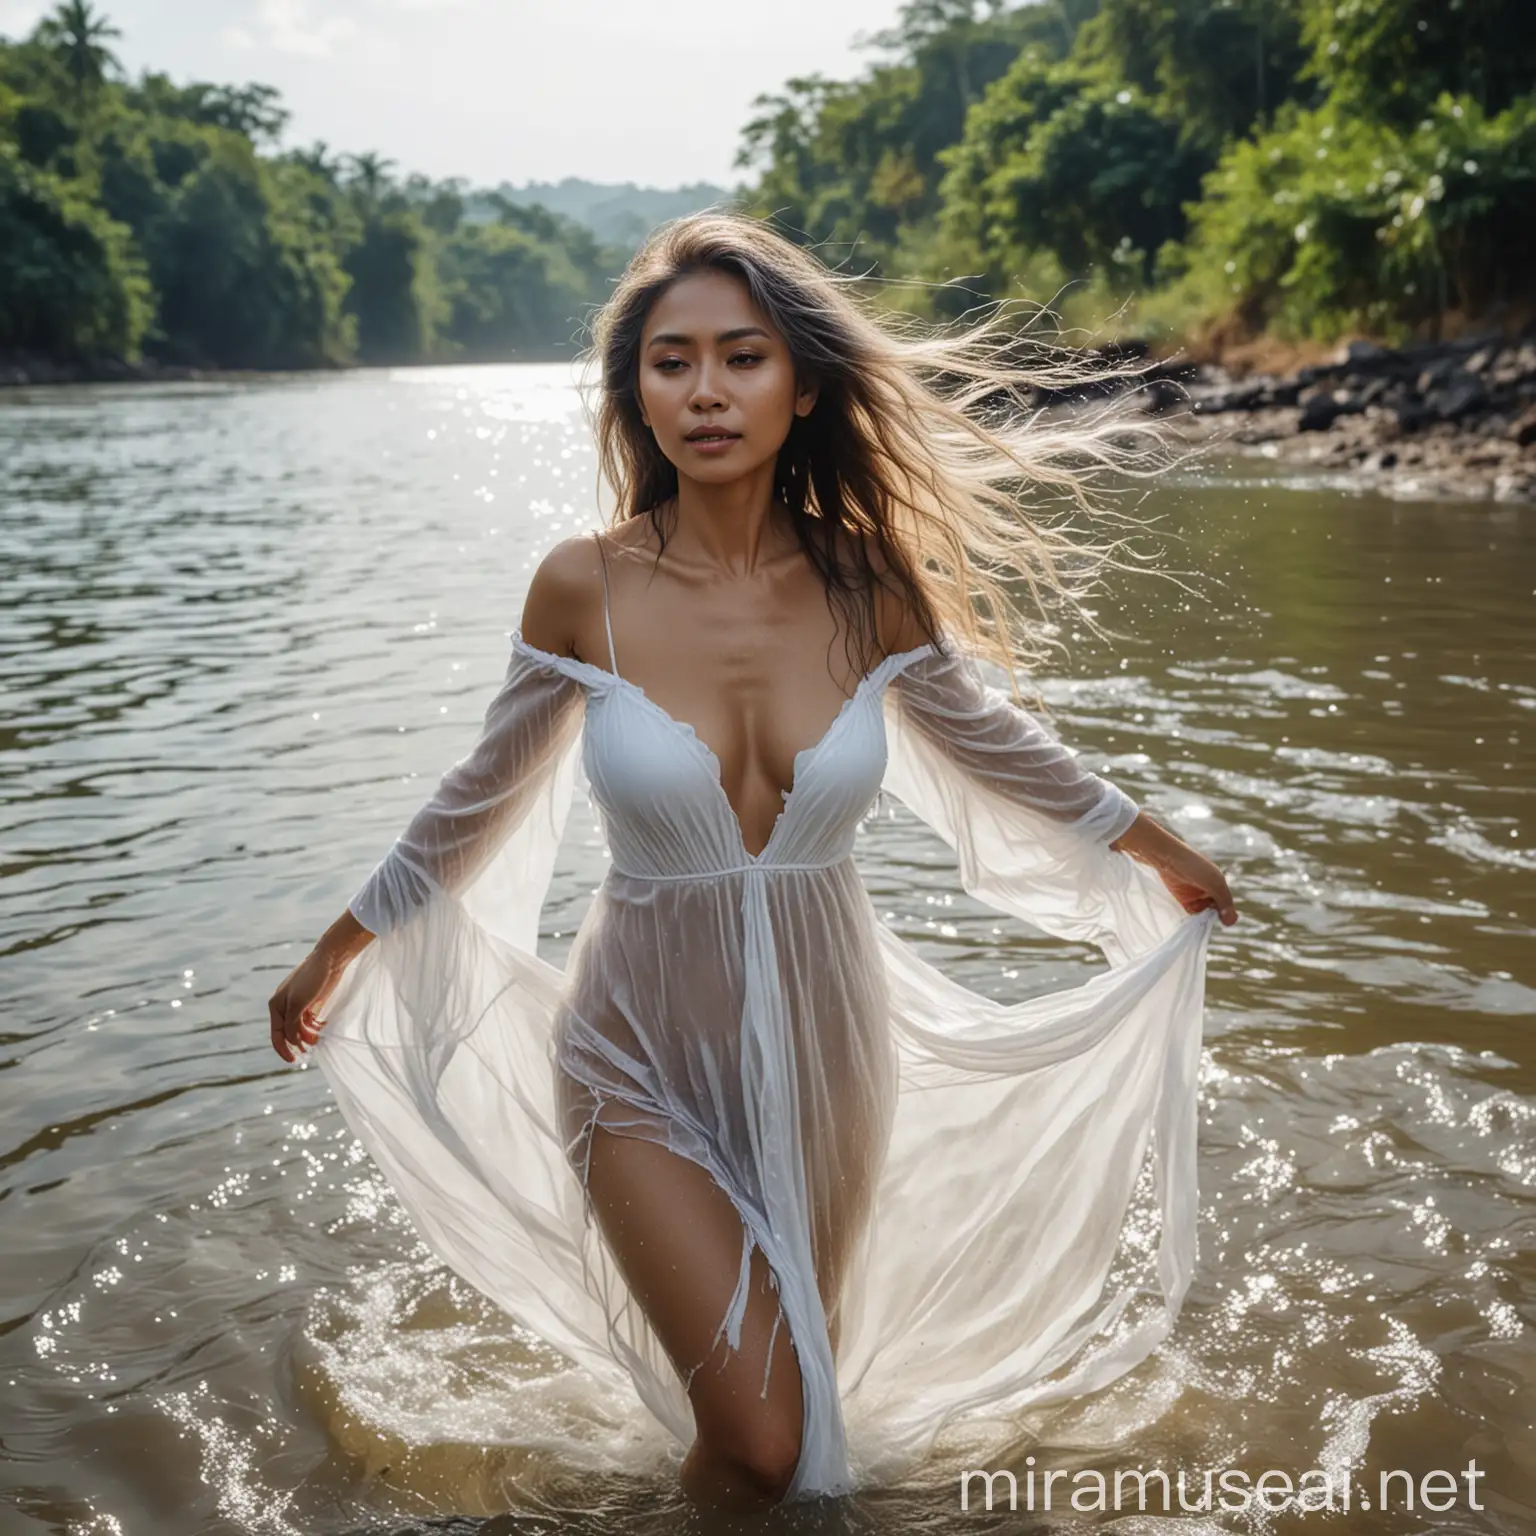 Indonesian Woman Bathing by the River in Transparent White Dress